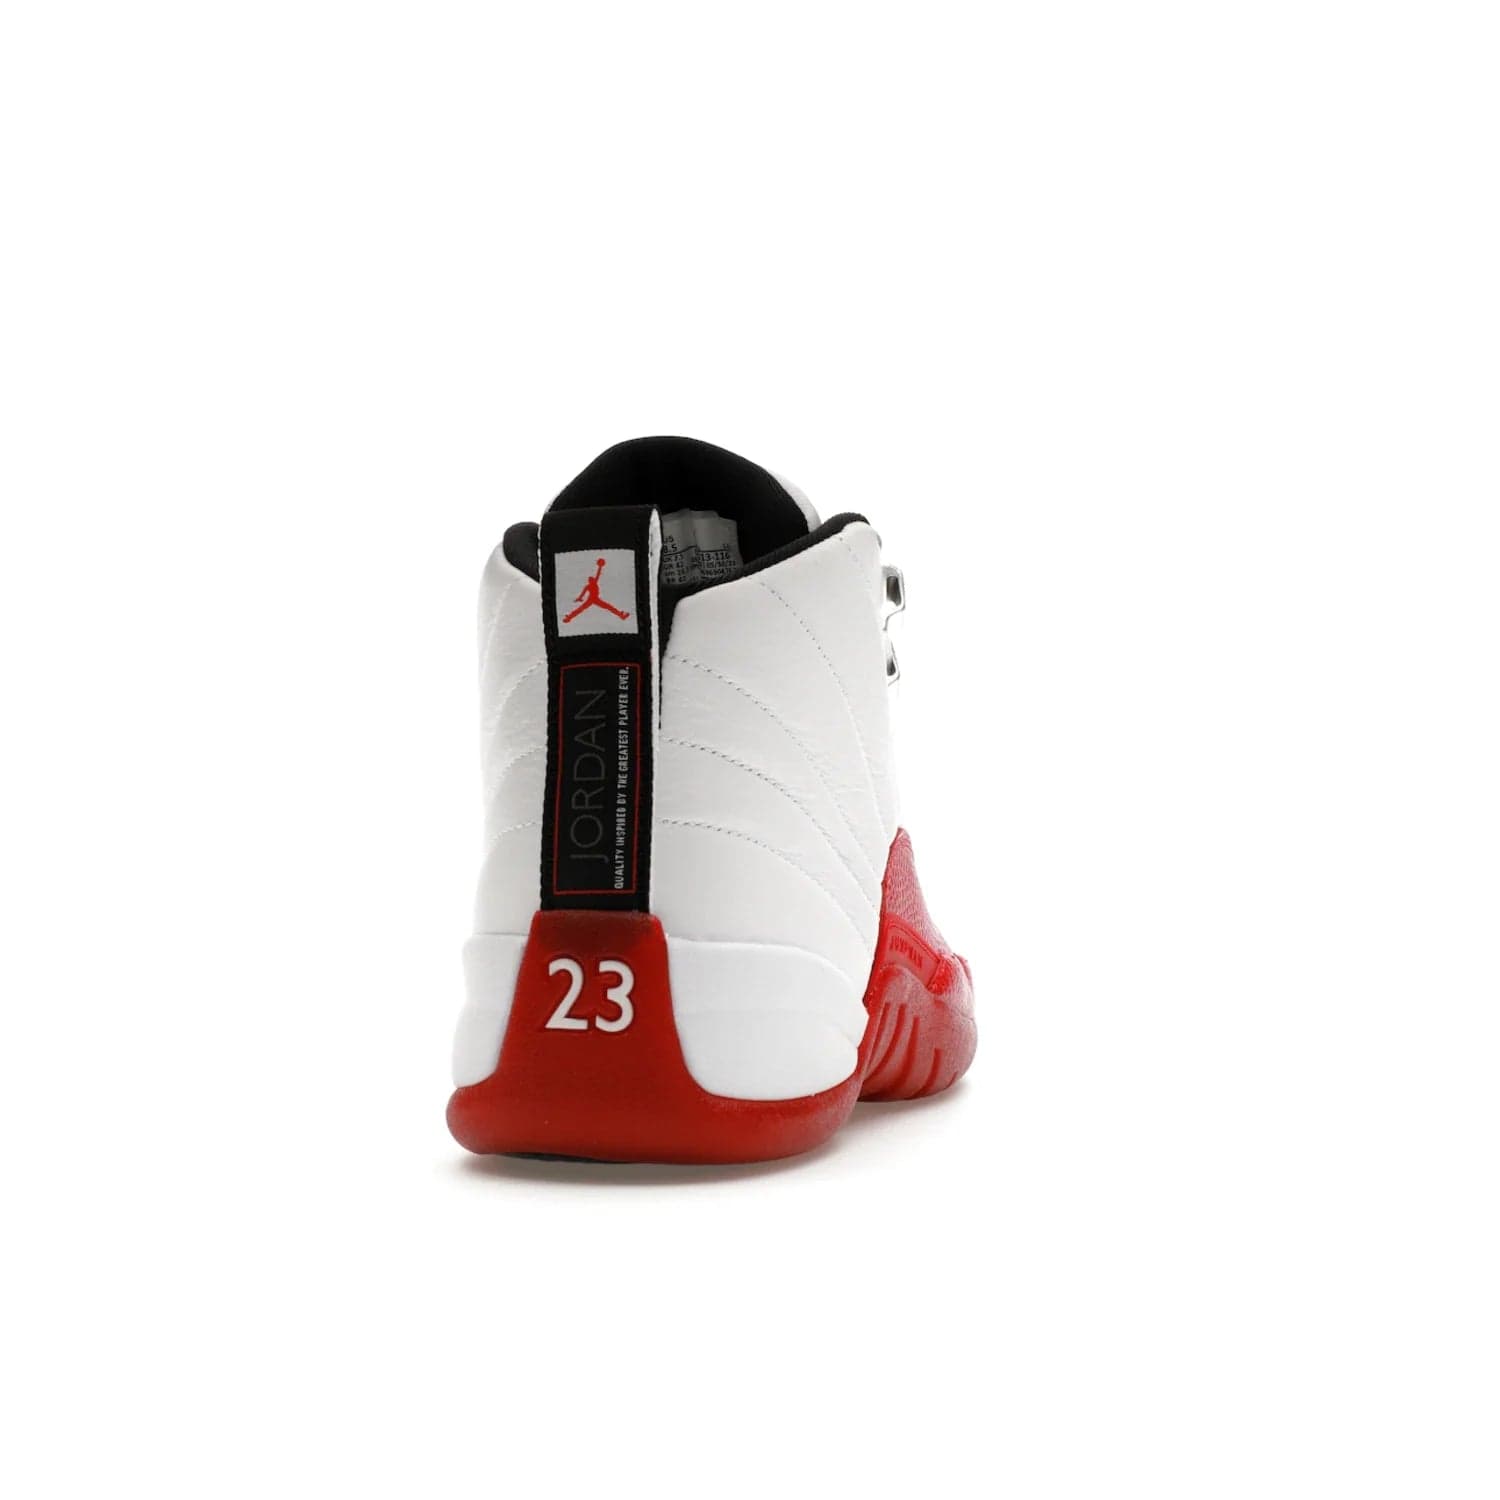 Jordan 12 Retro Cherry (2023) - Image 29 - Only at www.BallersClubKickz.com - Live your sneaker legend with the Jordan 12 Retro Cherry. Iconic pebbled leather mudguards, quilted uppers, and varsity red accents make this 1997 classic a must-have for 2023. Shine on with silver hardware and matching midsoles, and bring it all together for limited-edition style on October 28th. Step into Jordan legacy with the Retro Cherry.